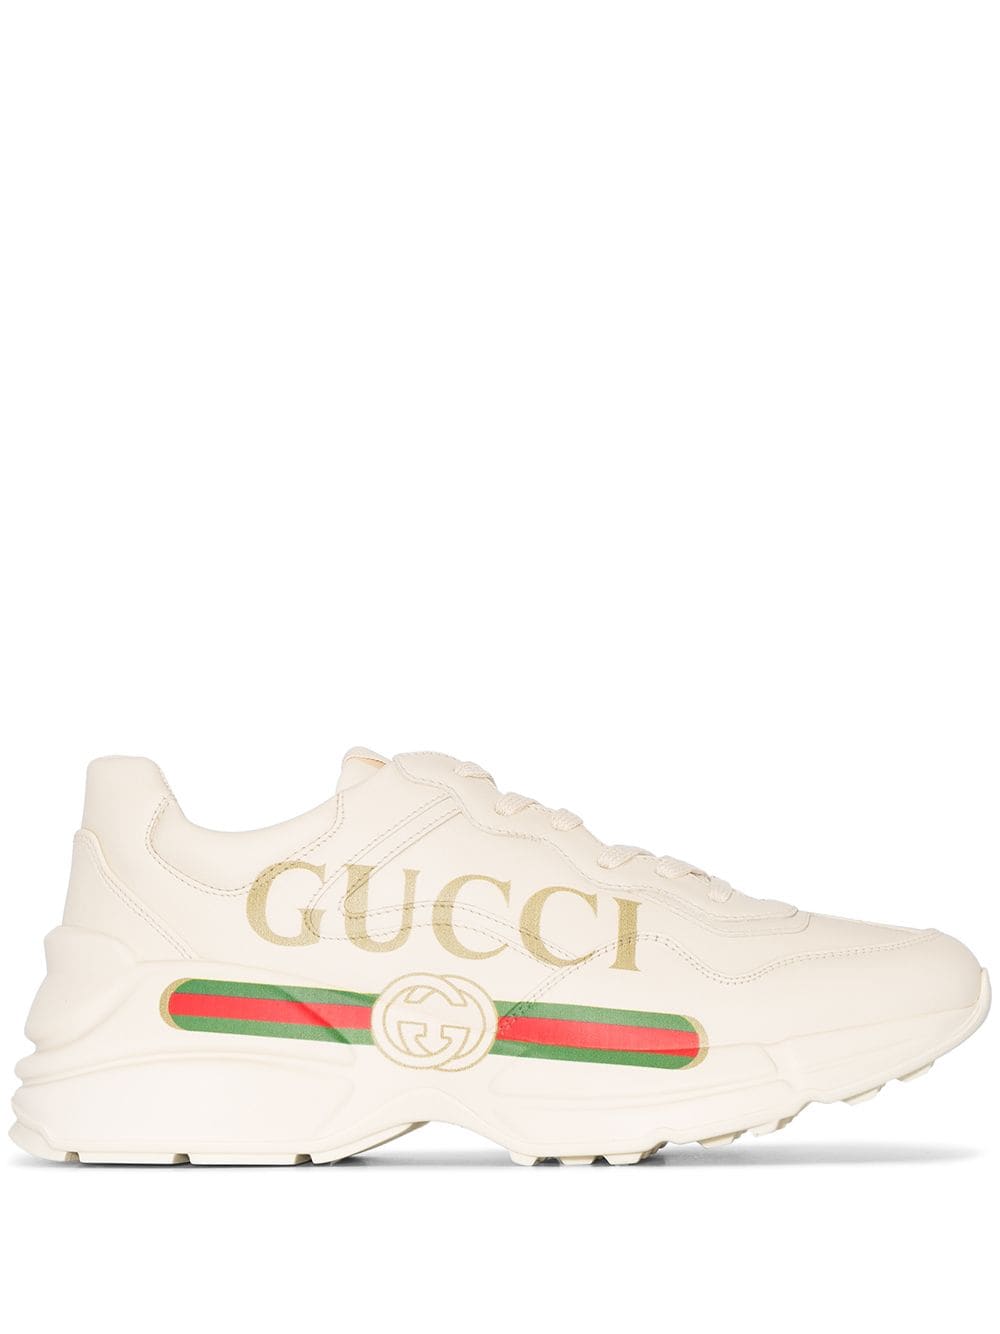 sneakers similar to gucci